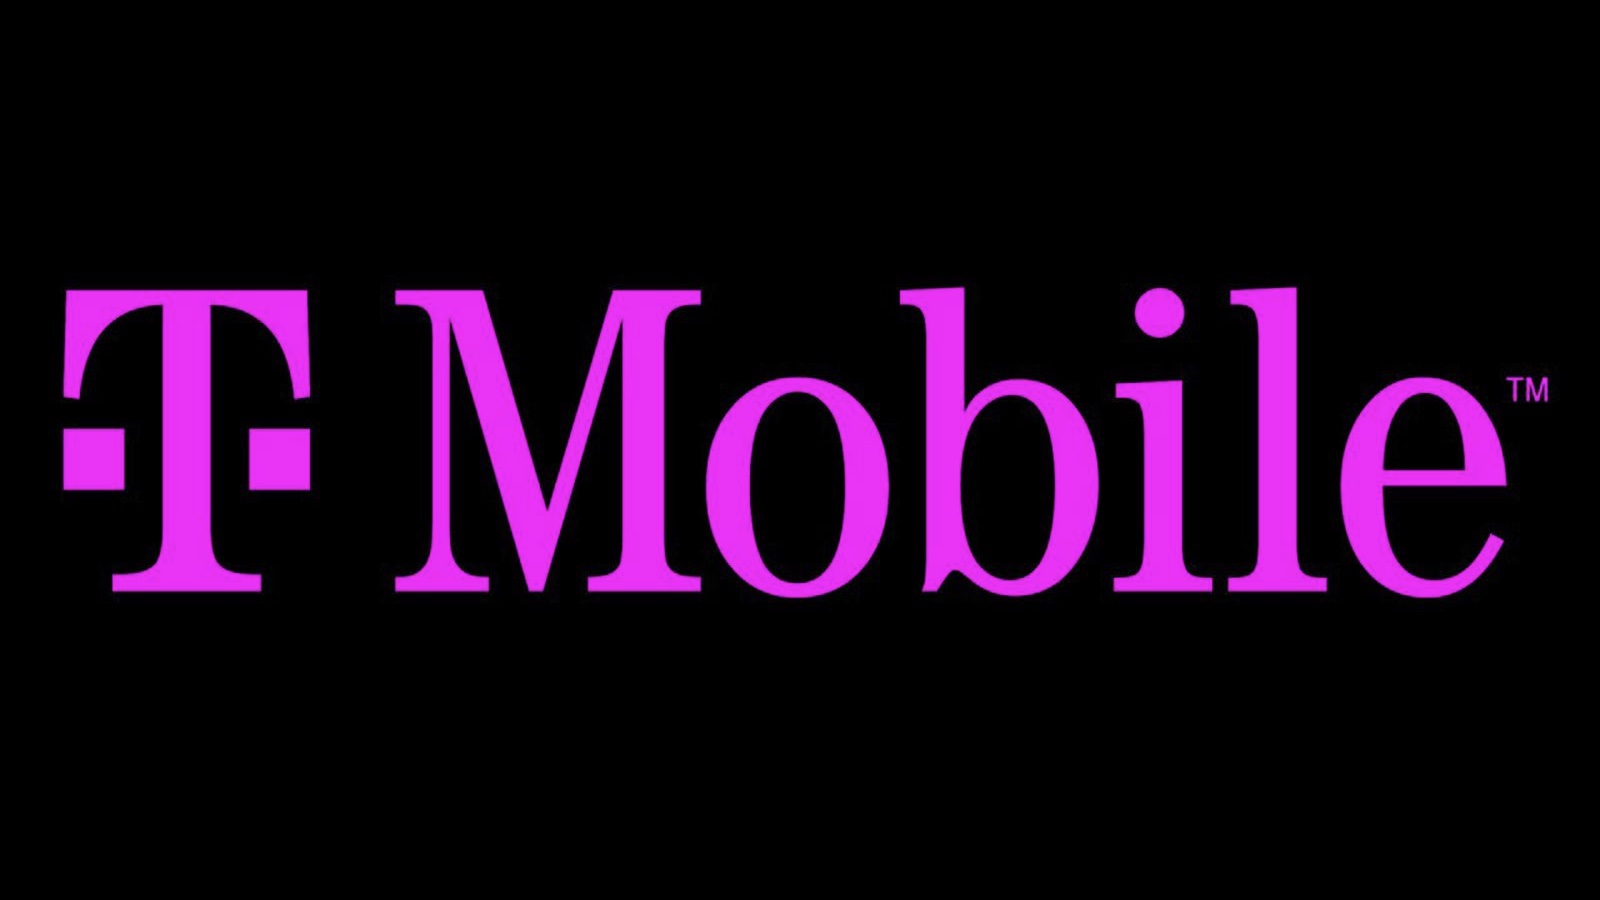 TMobile Automatically Upgrading Users to More Expensive Plans, But